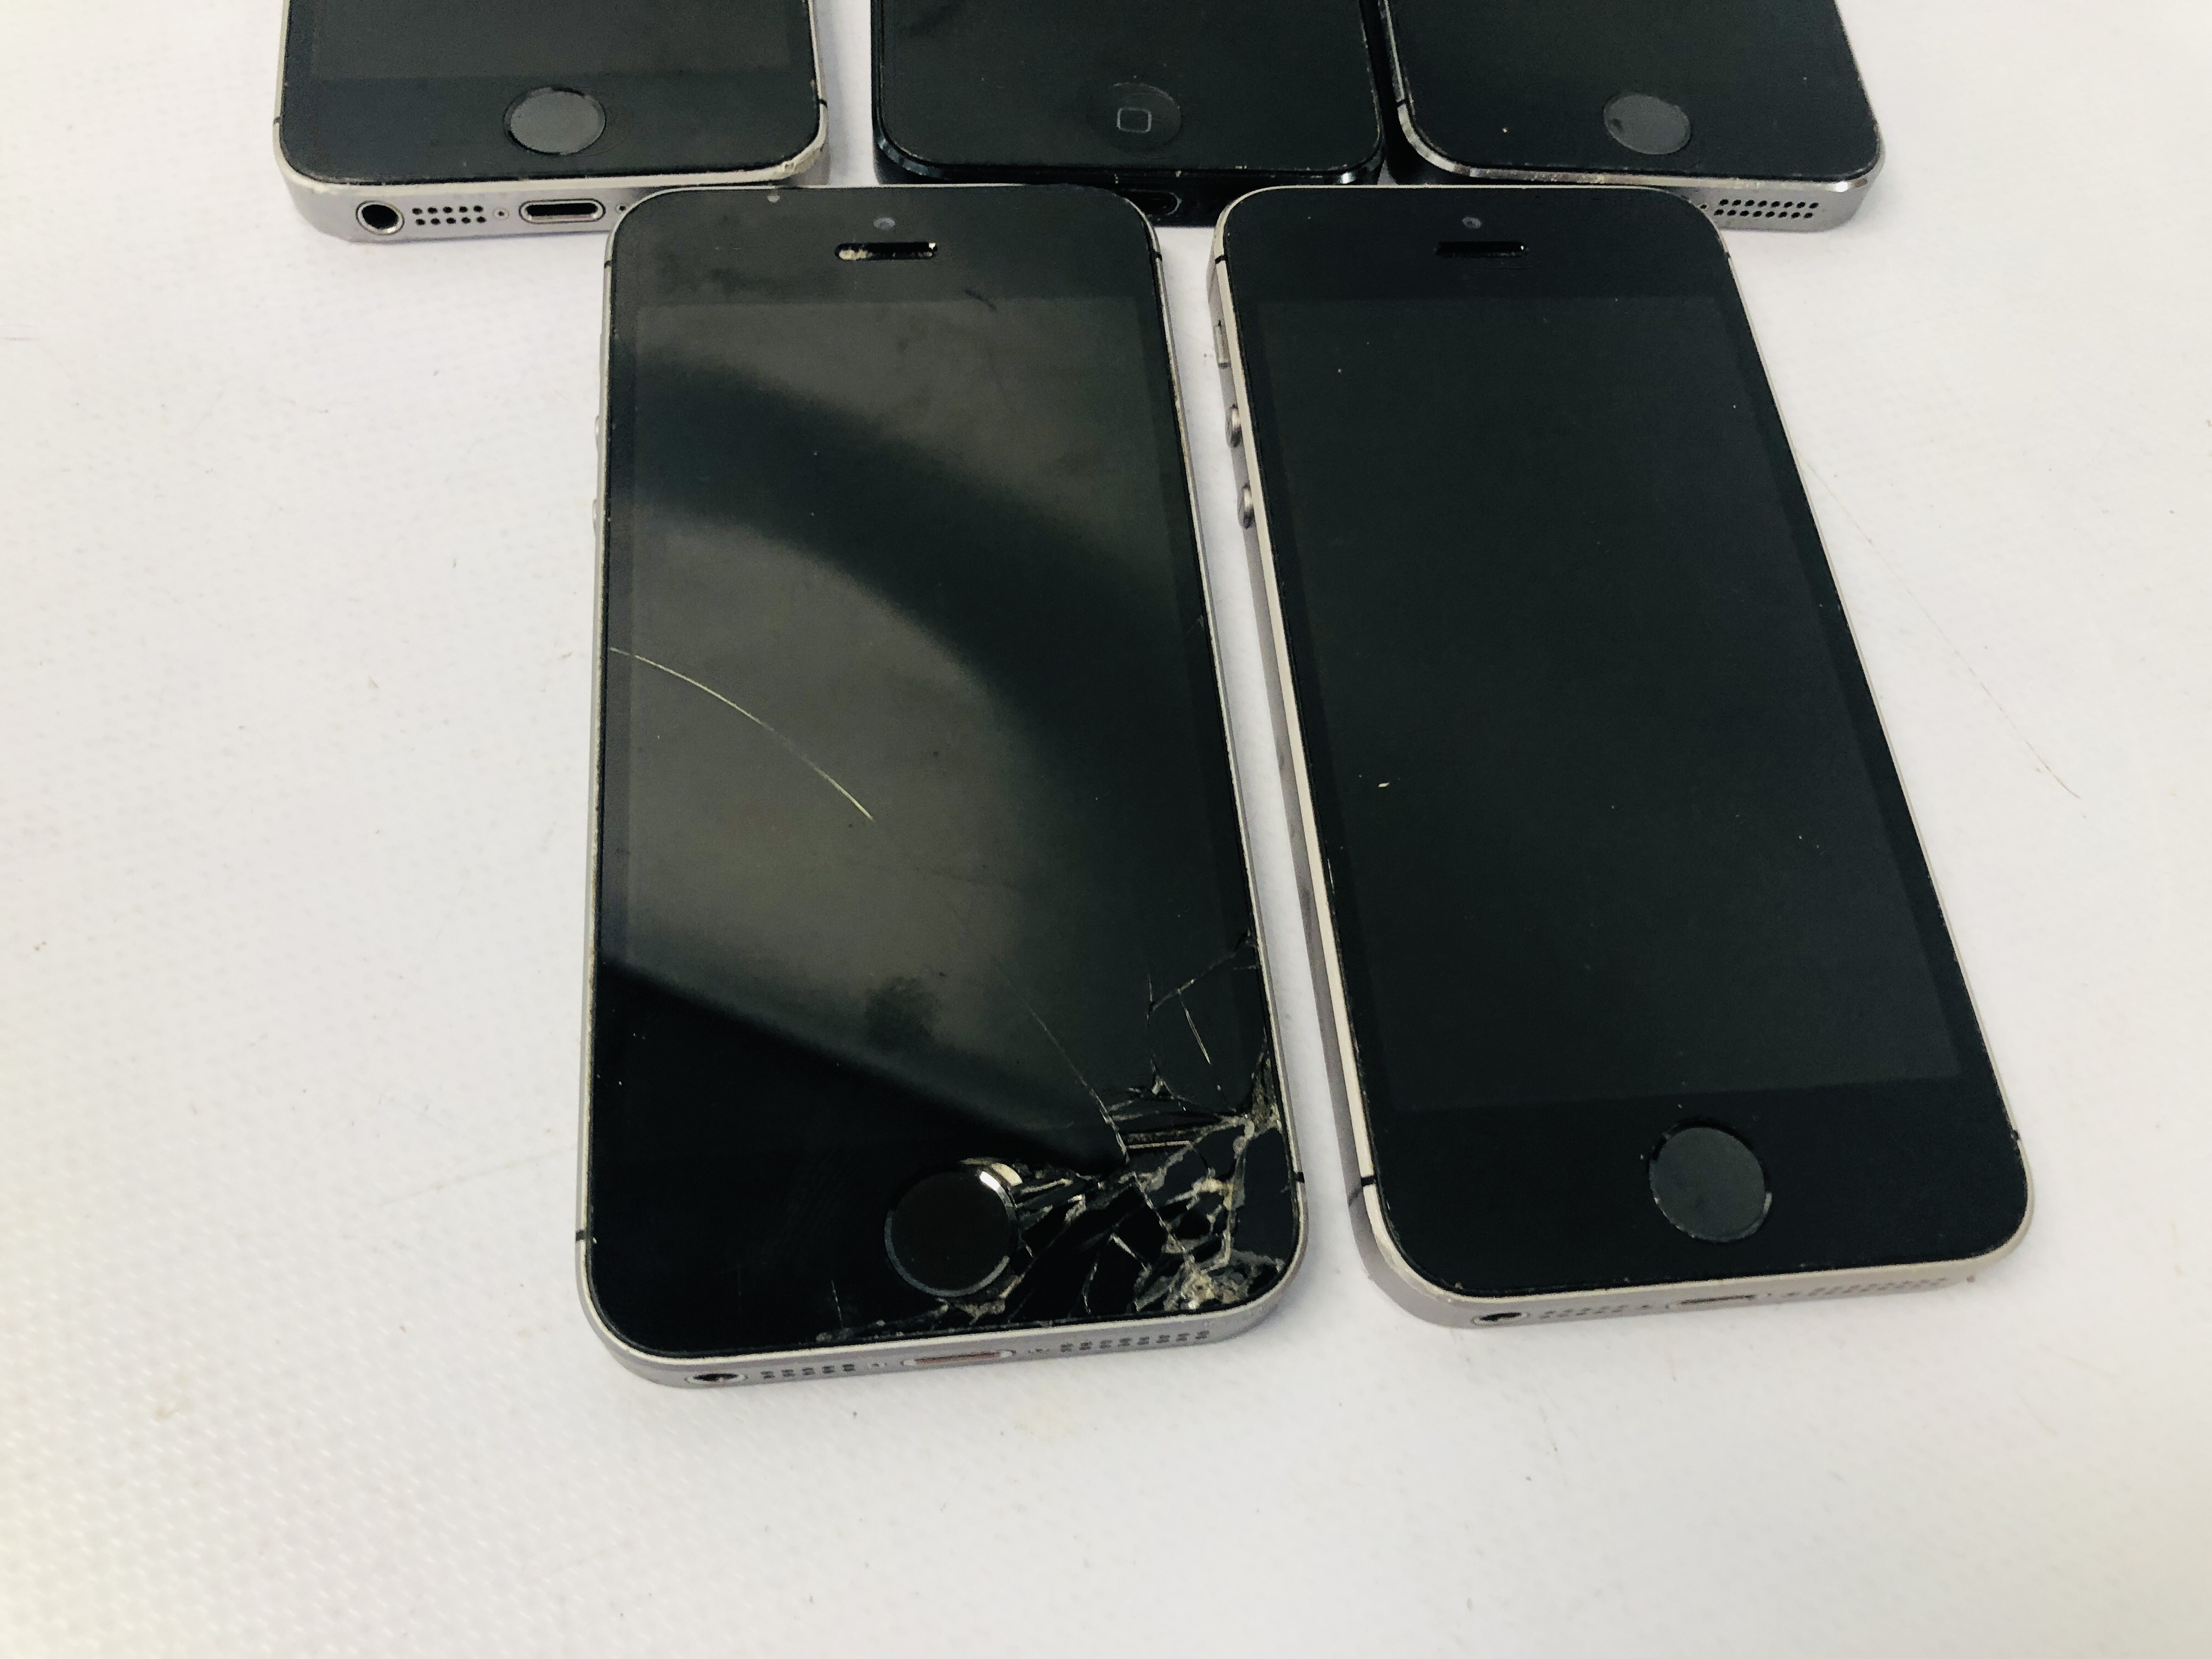 8 X APPLE IPHONE (5 X 5S, 3 X 5SE) TWO A/F CONDITION, ICLOUD LOCKED, - Image 4 of 7